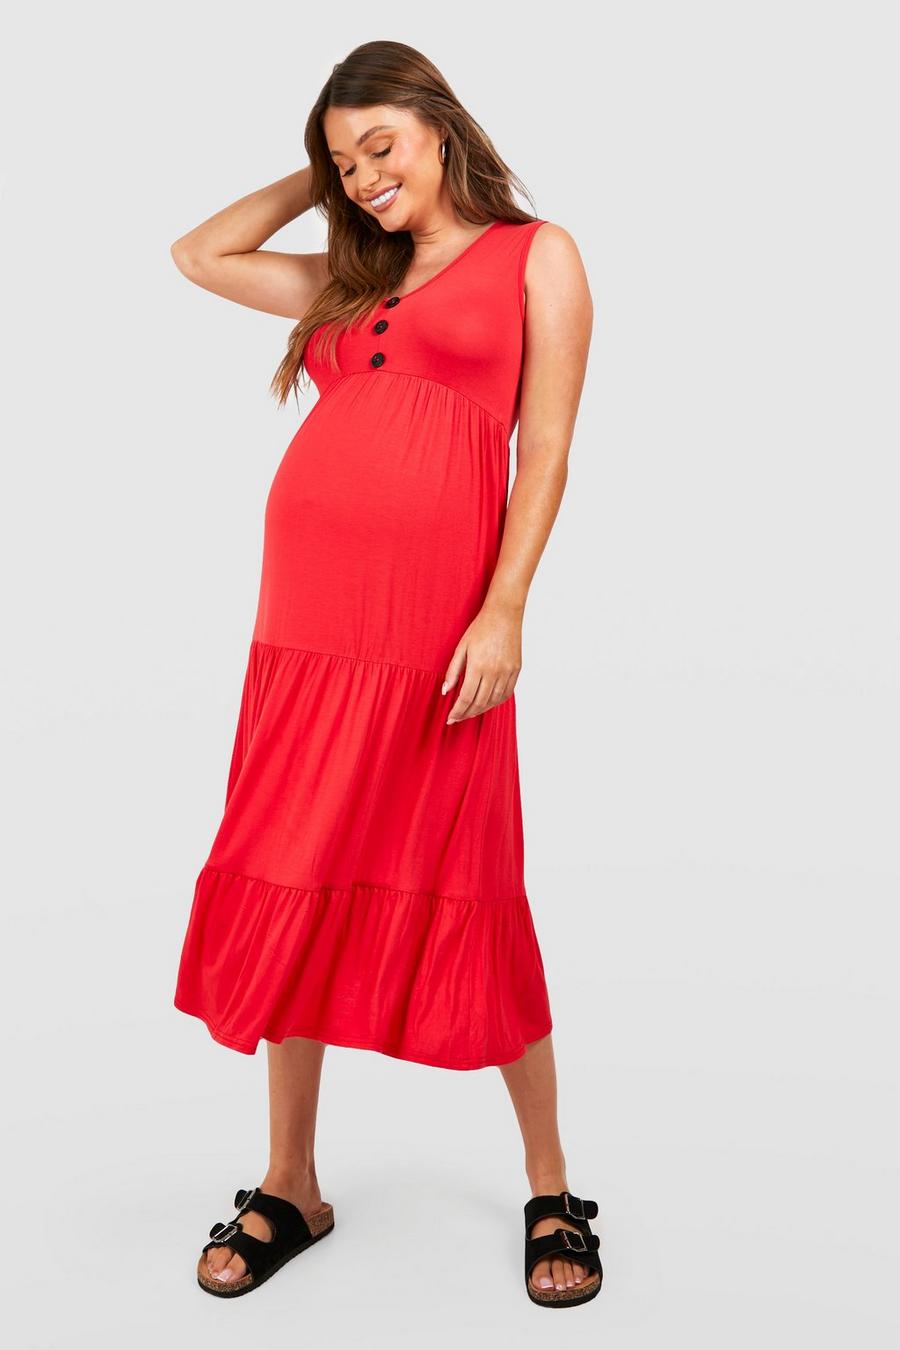 Maternity Clothes Sale, Cheap Maternity Clothes